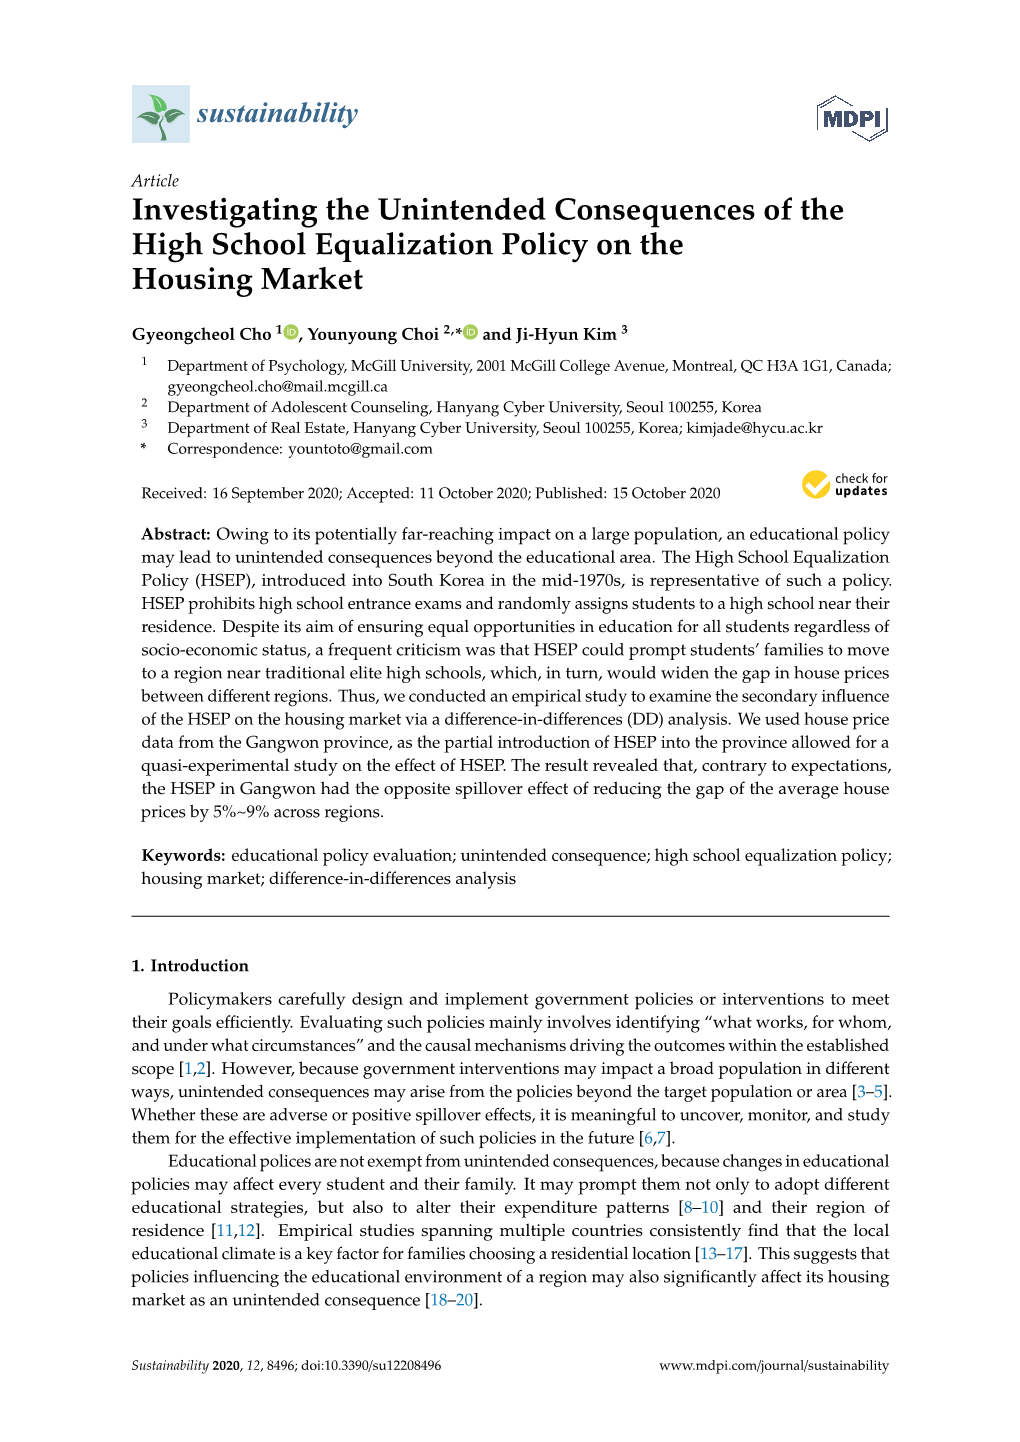 Investigating the Unintended Consequences of the High School Equalization Policy on the Housing Market